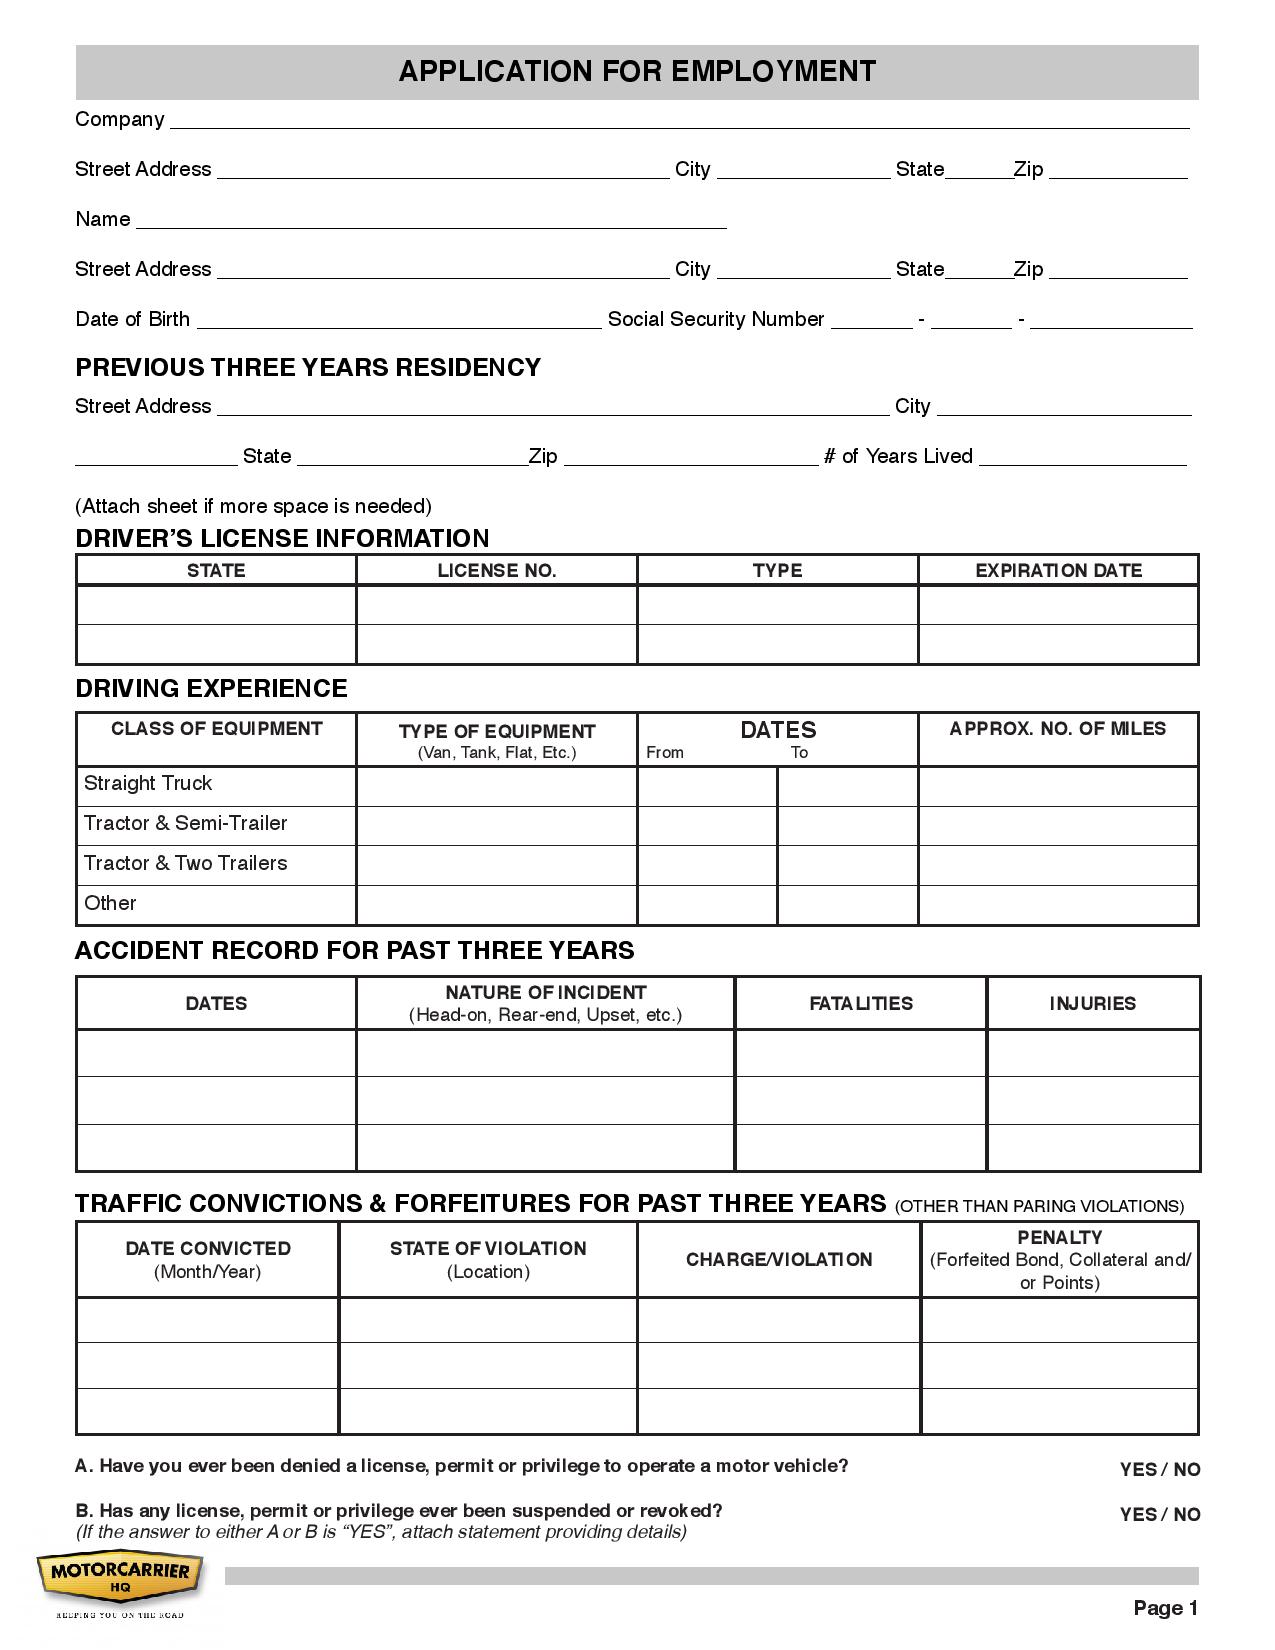 Example of an employment application PDF.